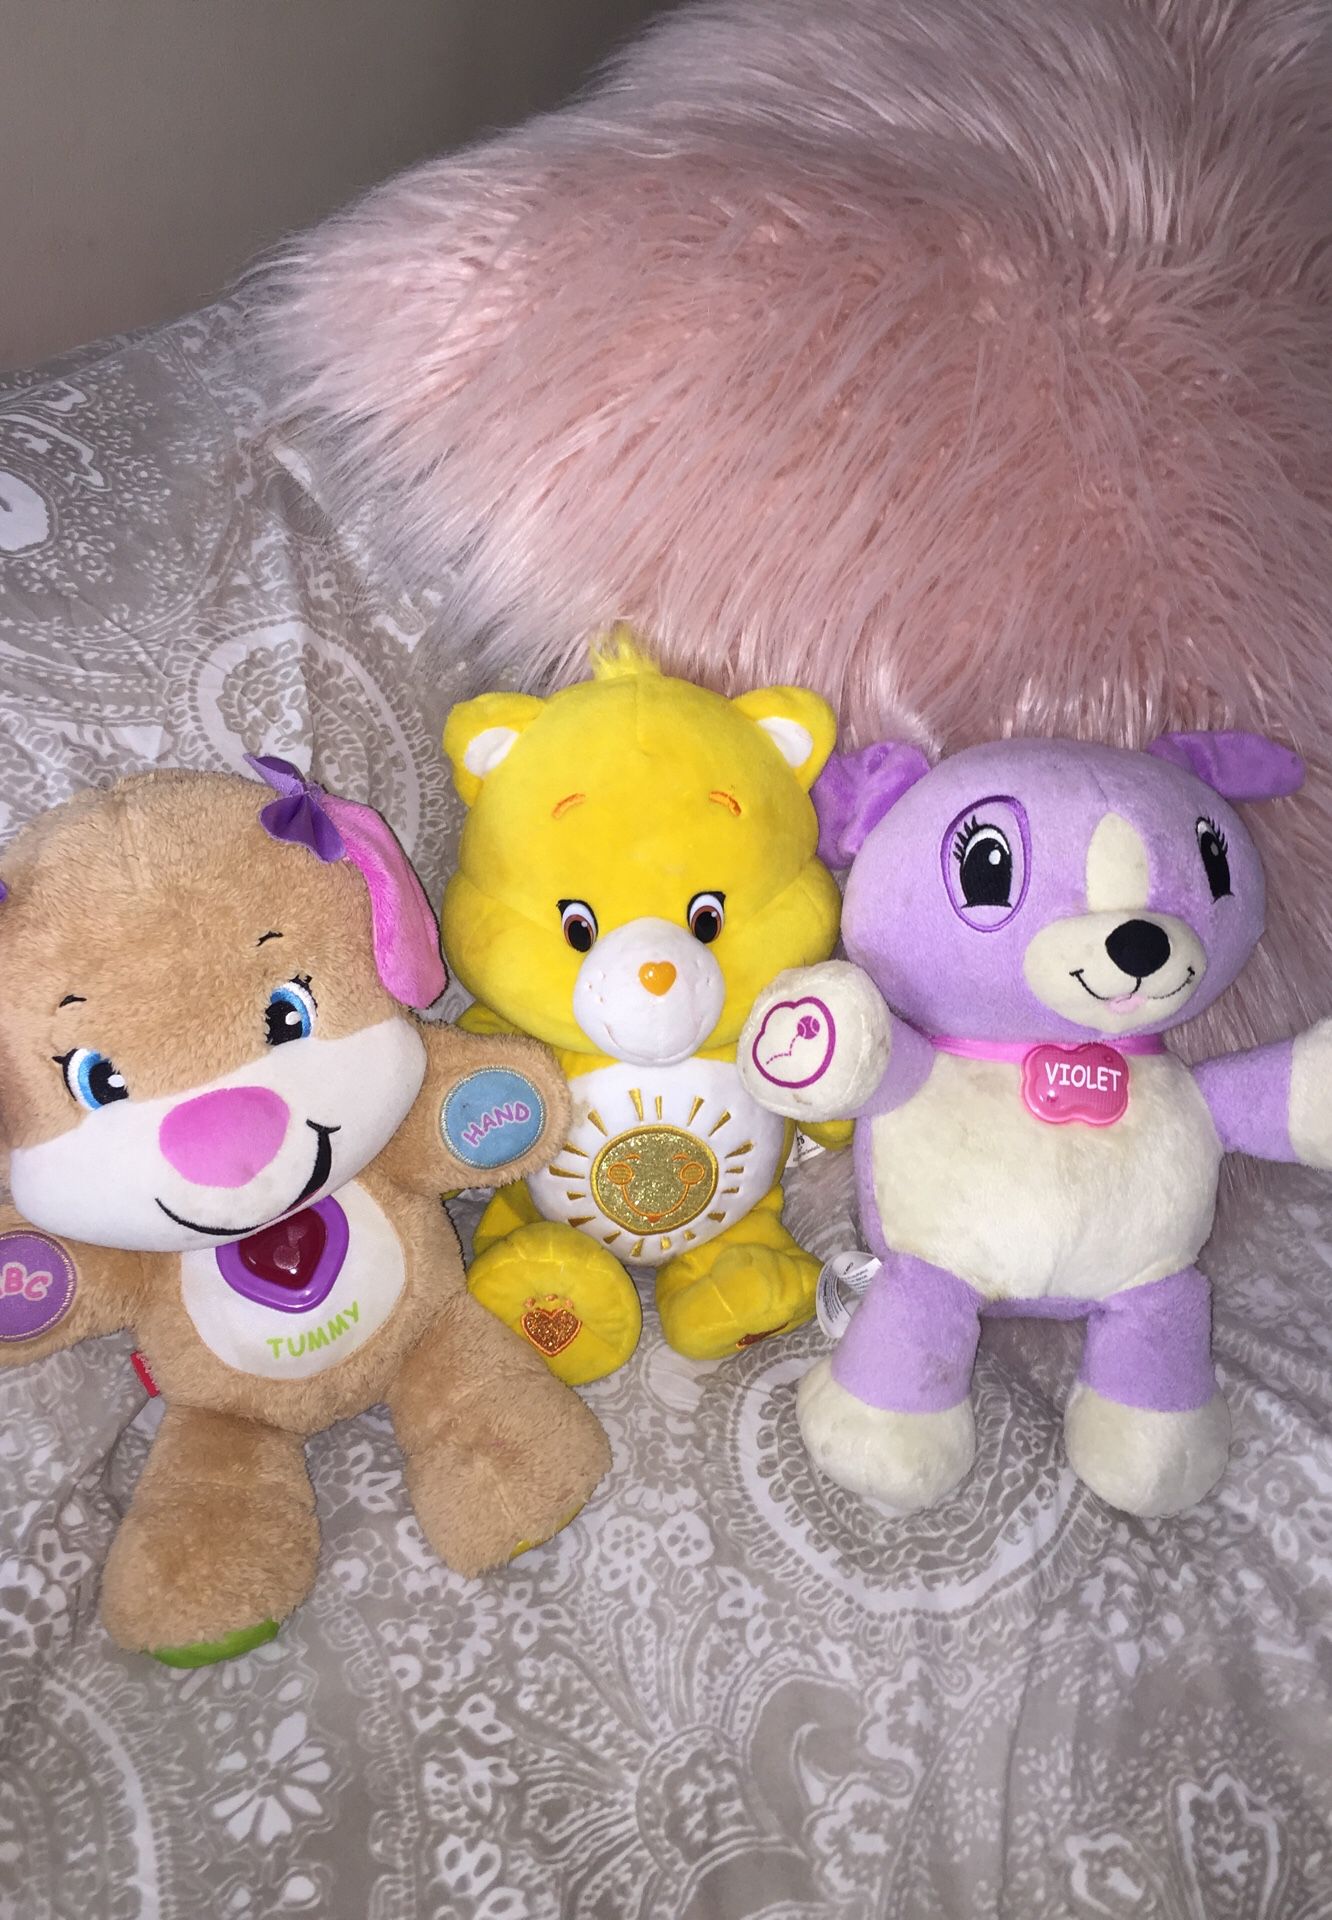 Musical and talking stuffed animals